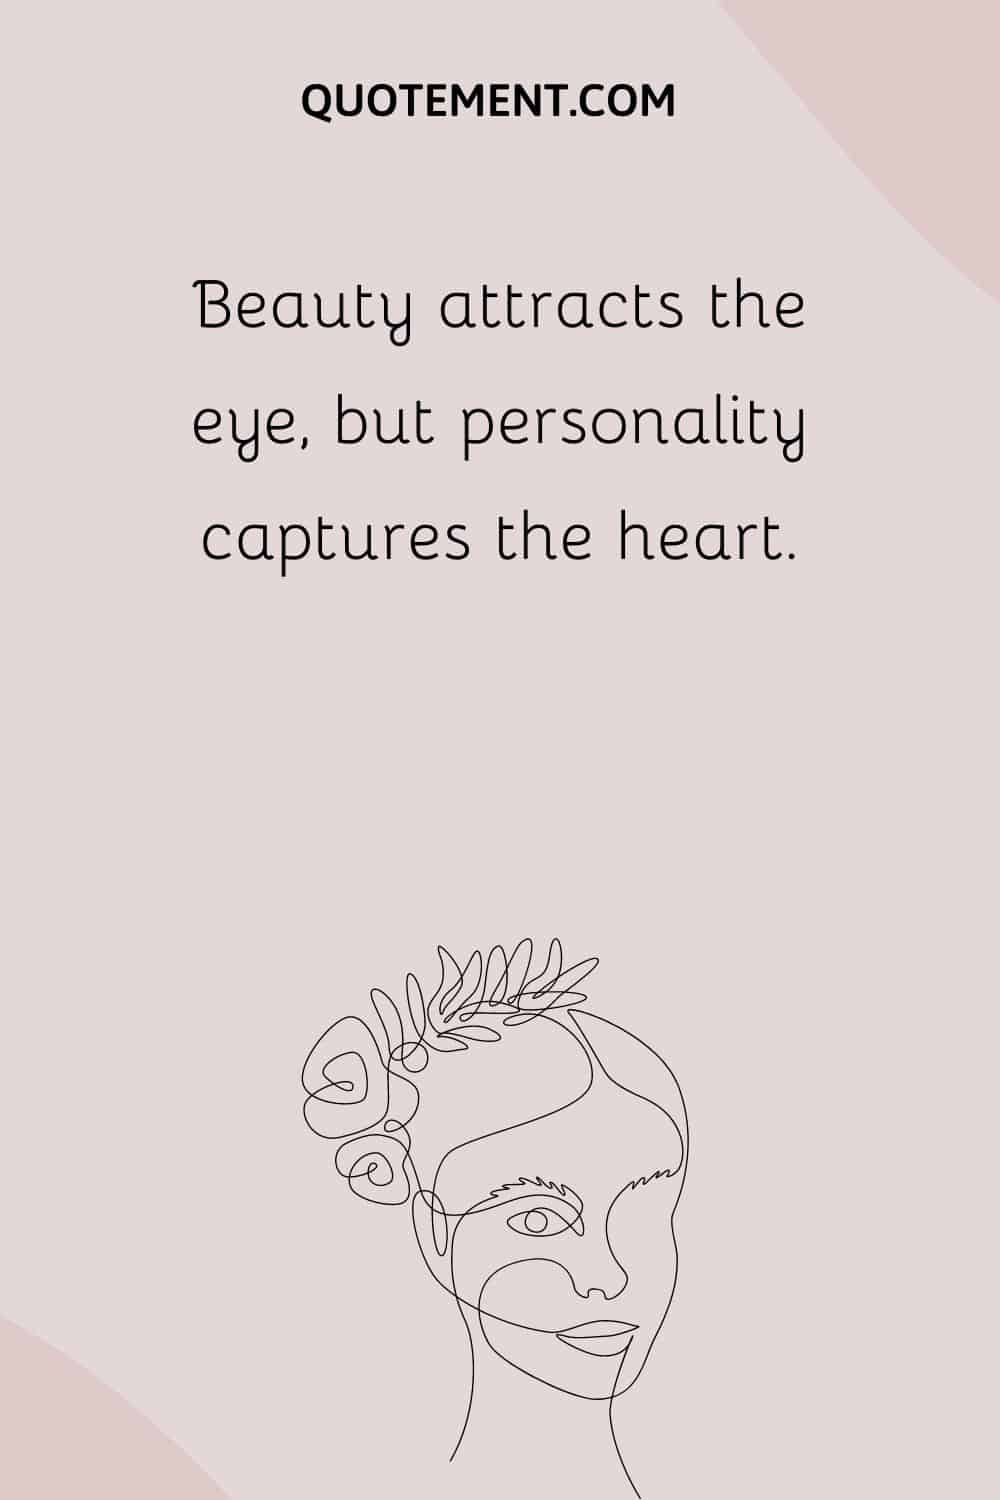 Beauty attracts the eye, but personality captures the heart.